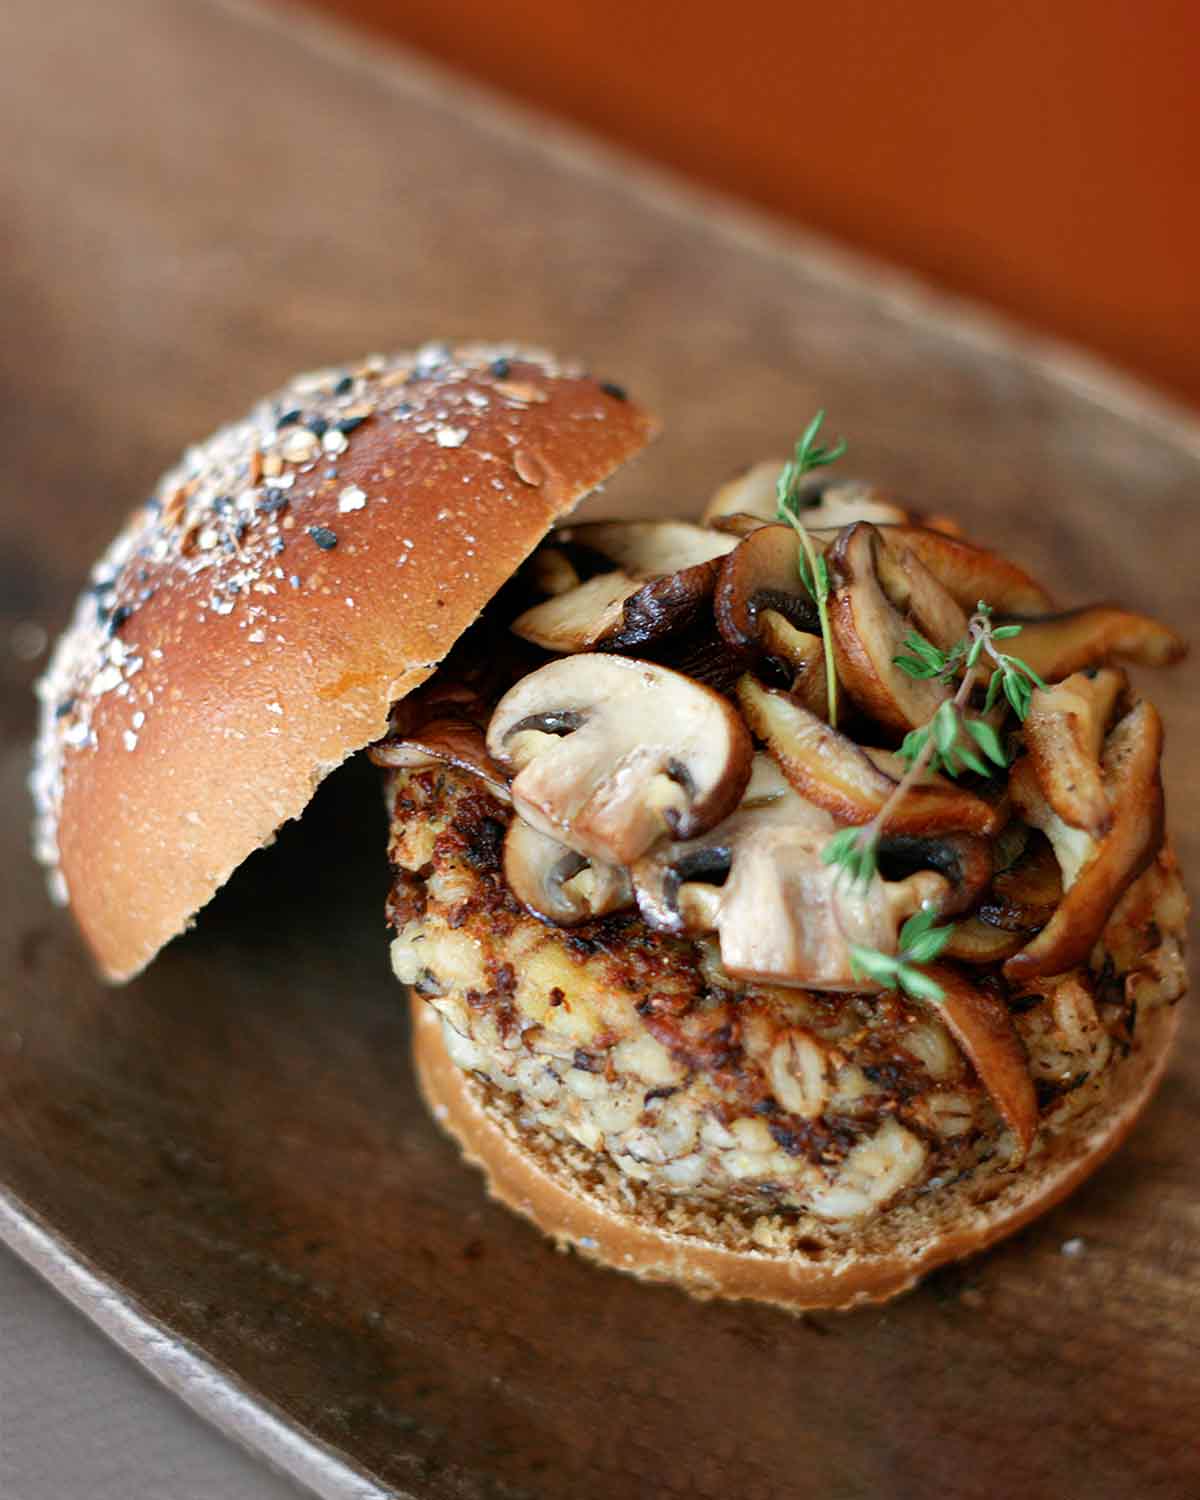 A veggie burger topped with mushrooms and thyme on an oval plate.